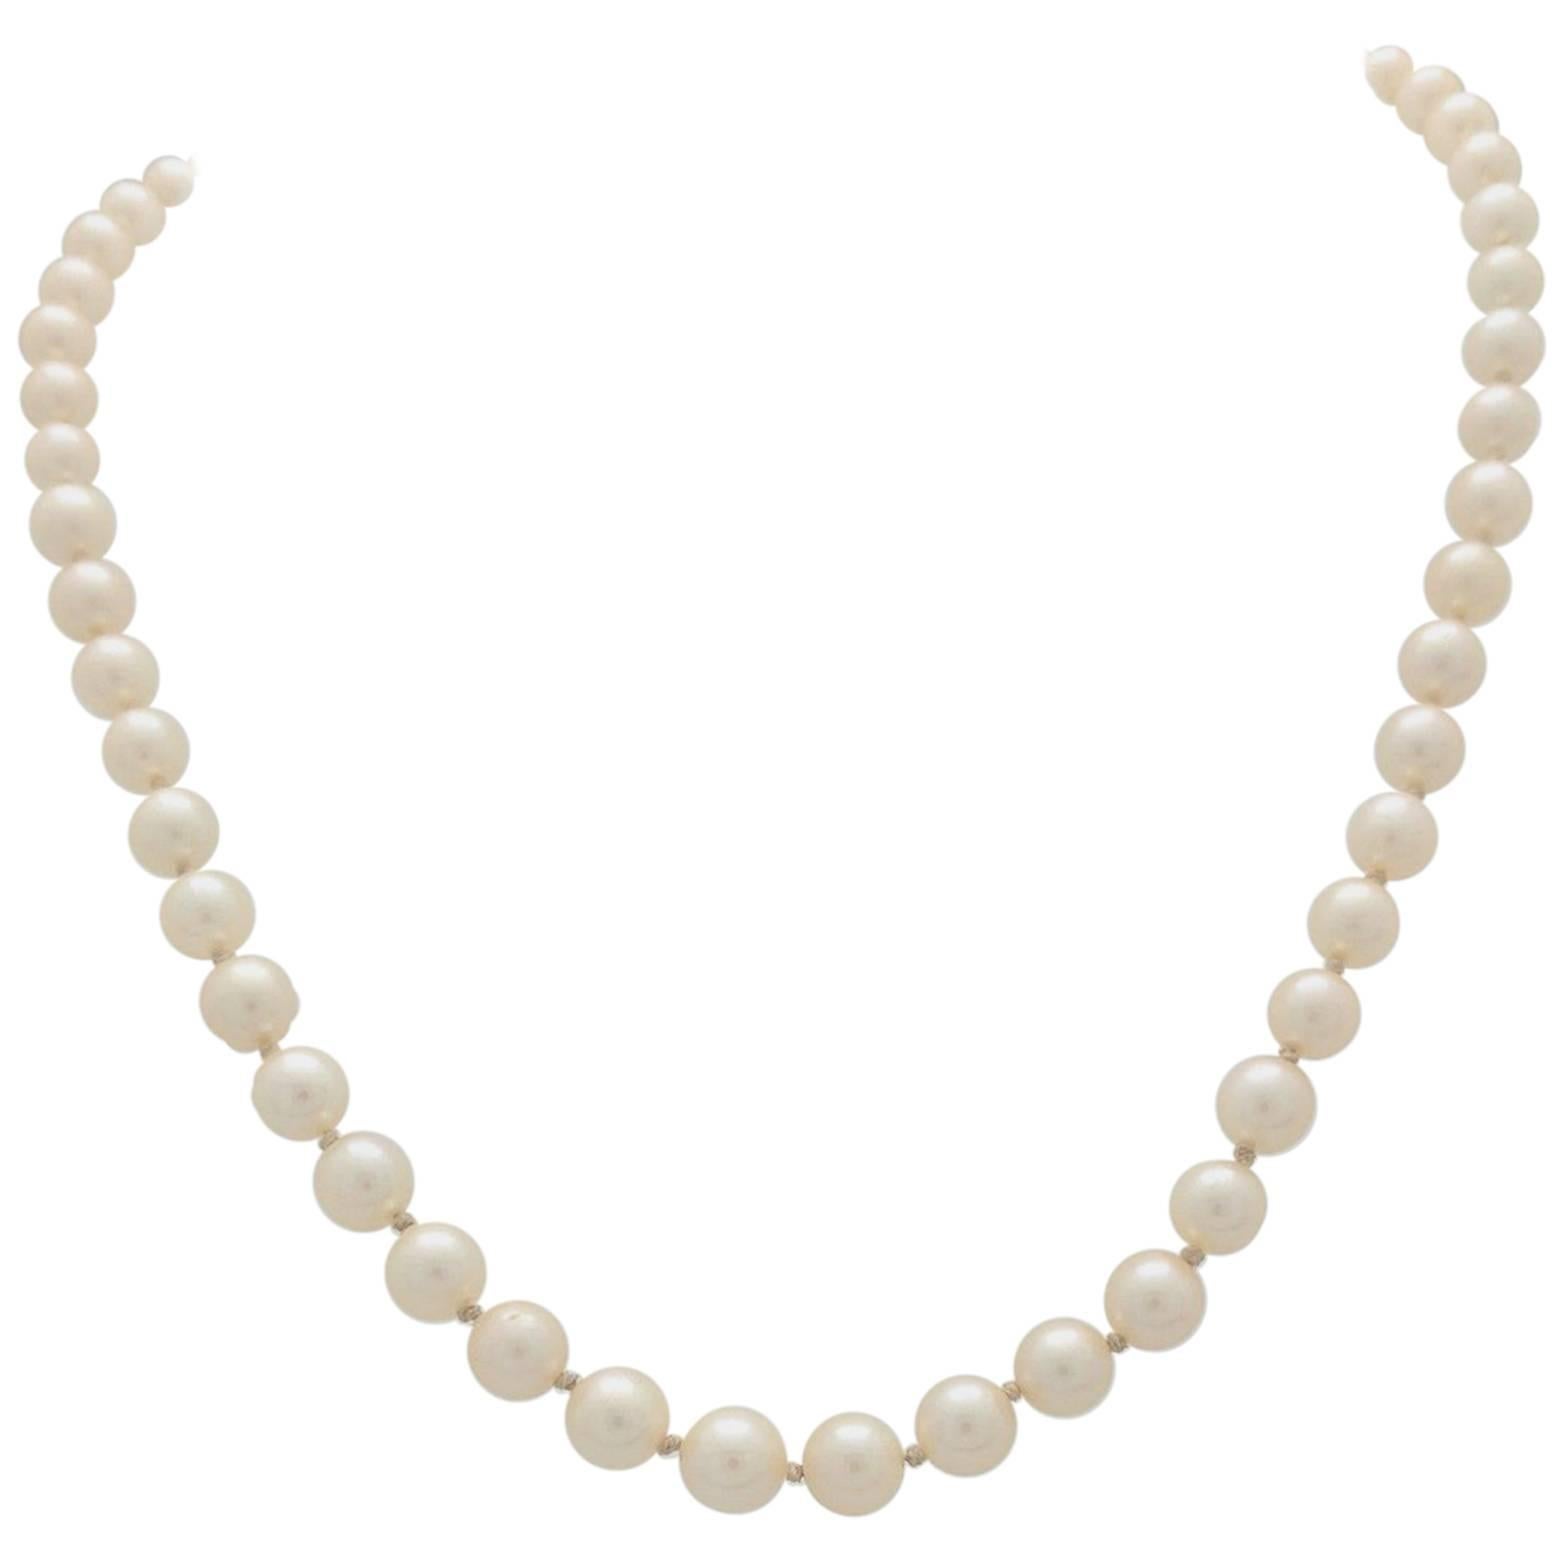 14 Karat White Gold Graduating Cultured Pearl Necklace